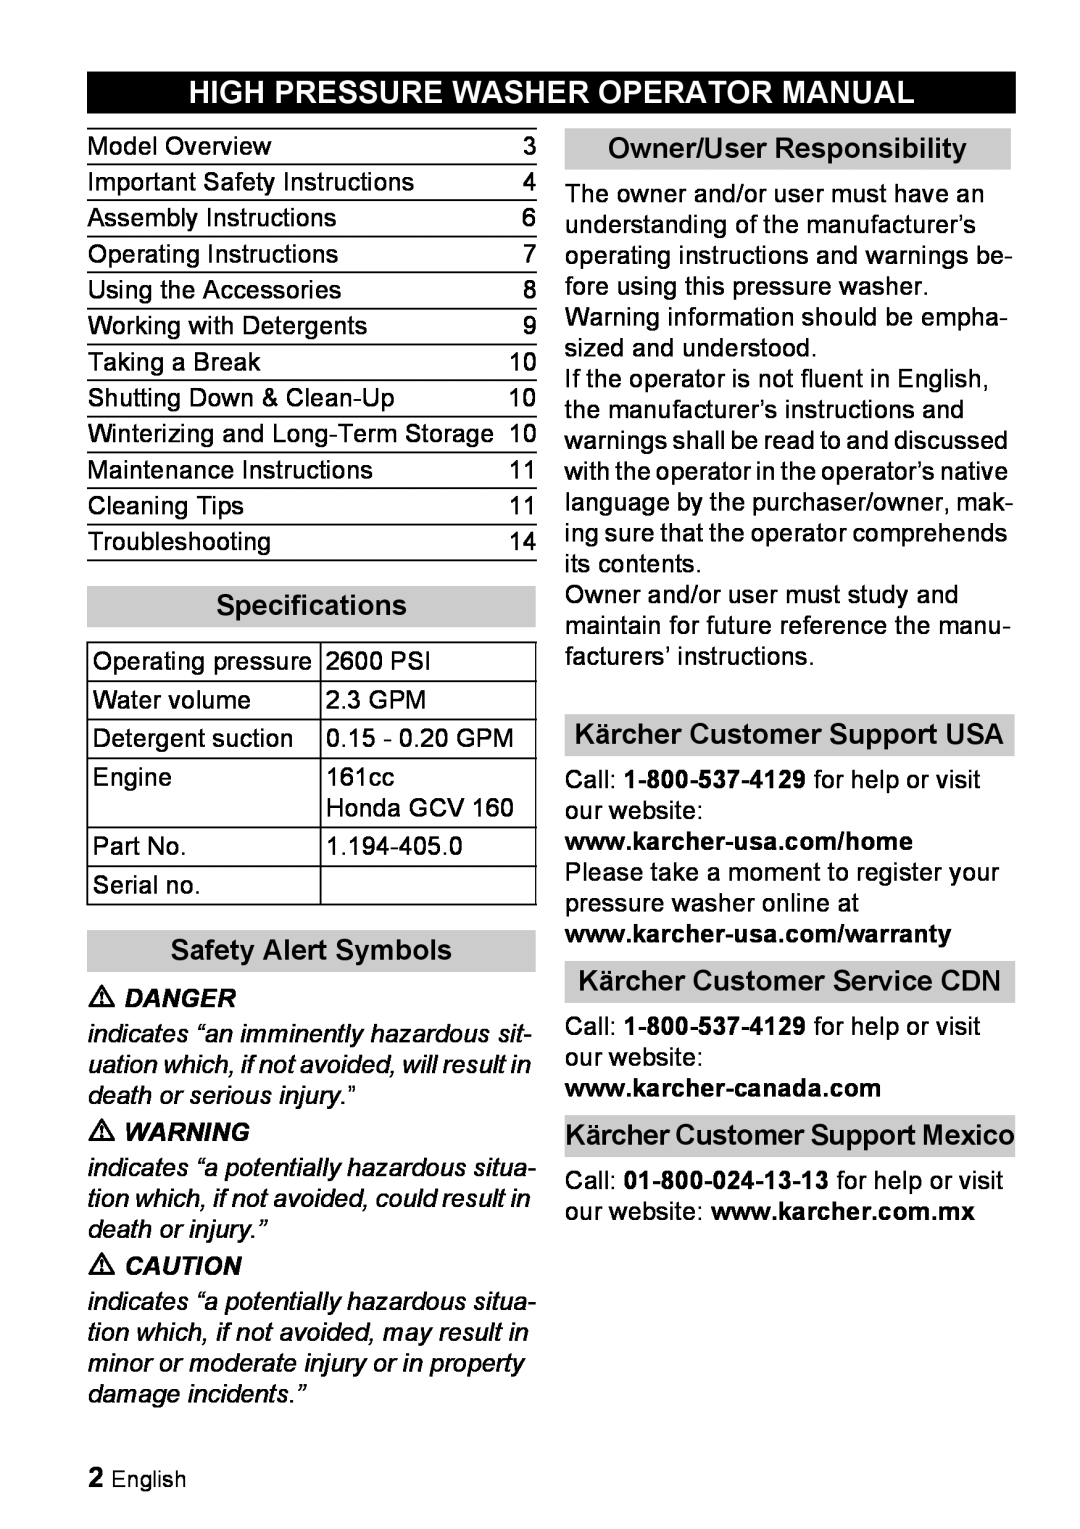 Karcher G 2600 PH High Pressure Washer Operator Manual, Specifications, Safety Alert Symbols, Owner/User Responsibility 